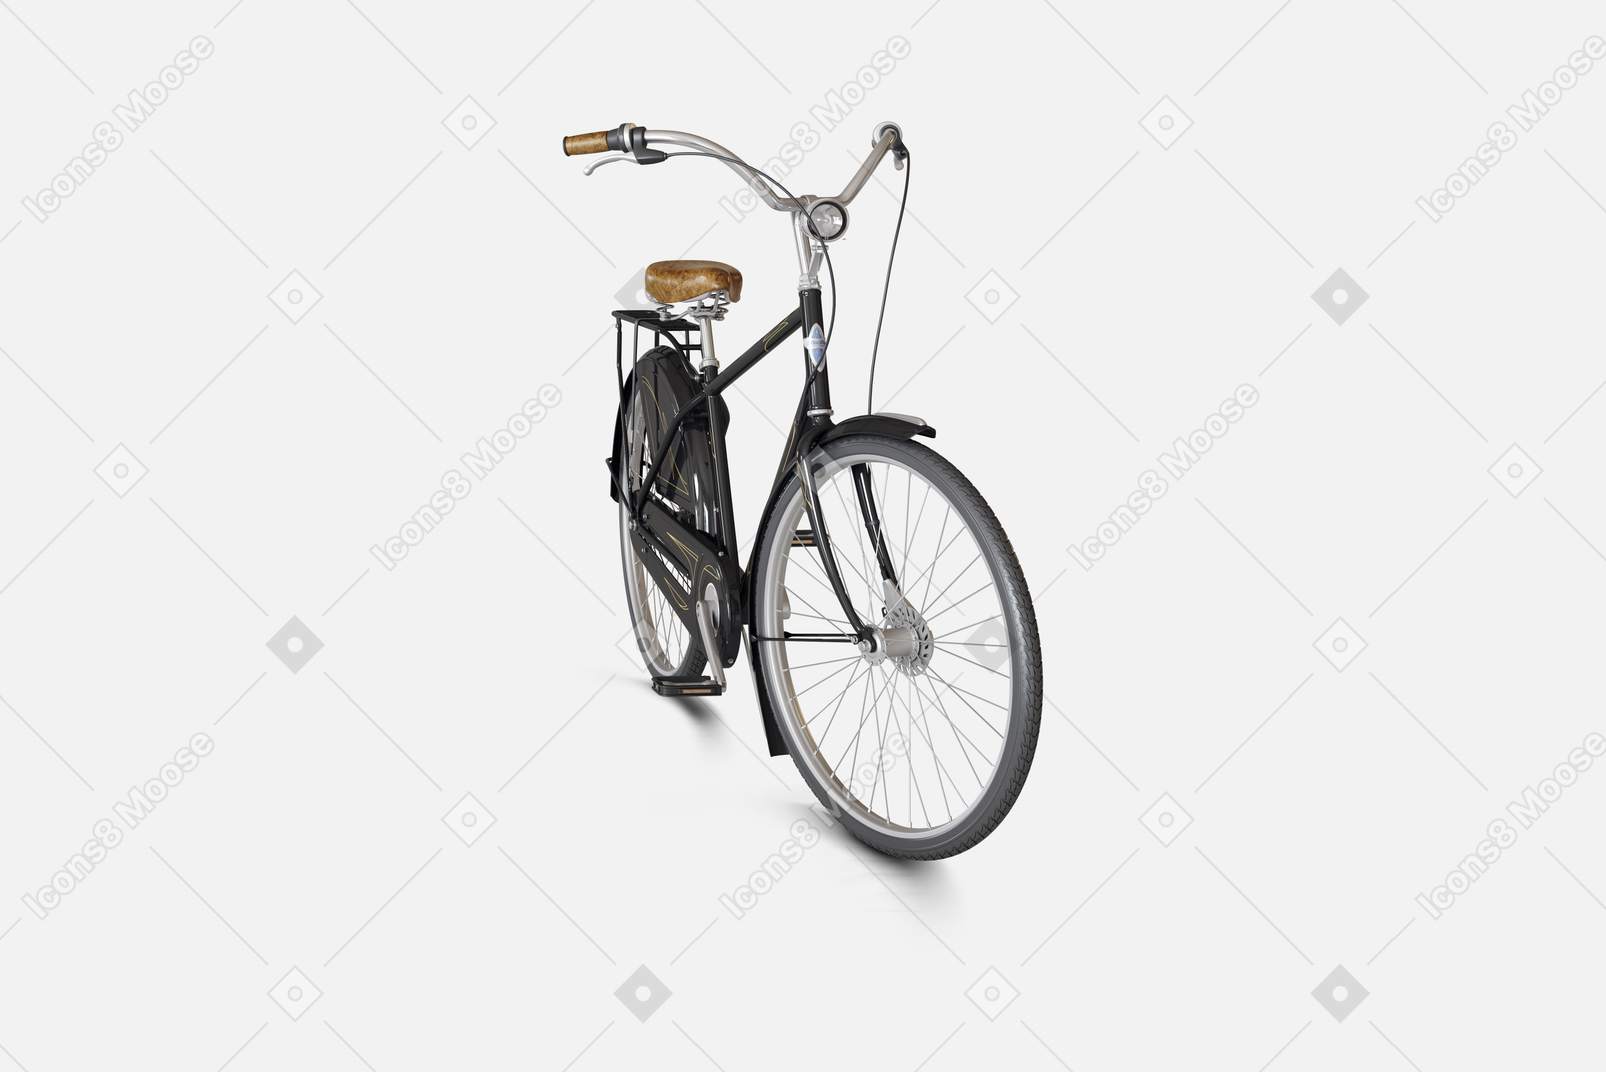 Black city bike with front and rear brakes and a special frame